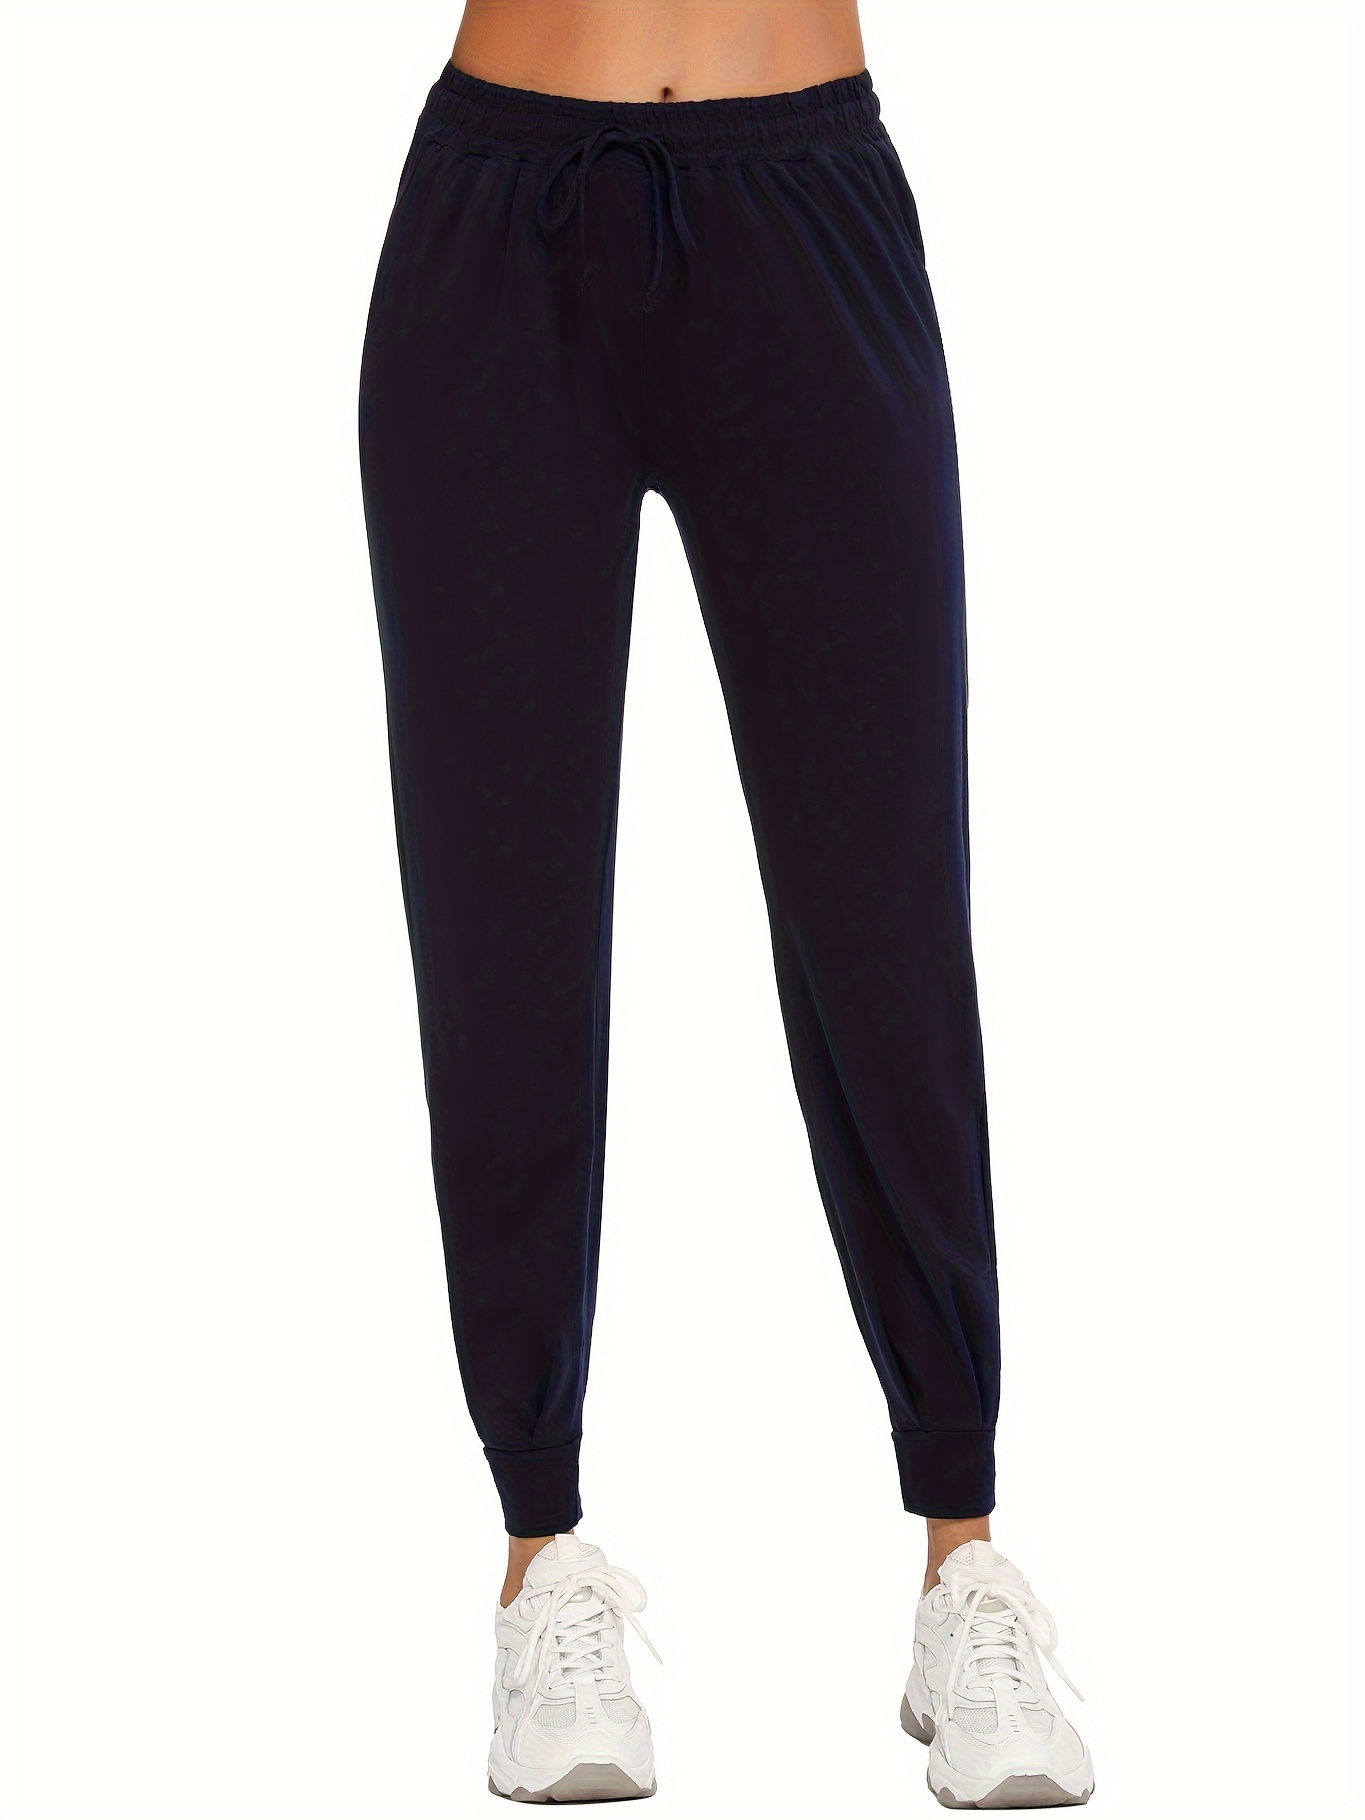 Anywhere Pockets Pleated Track Pants, Women's Sports Pants